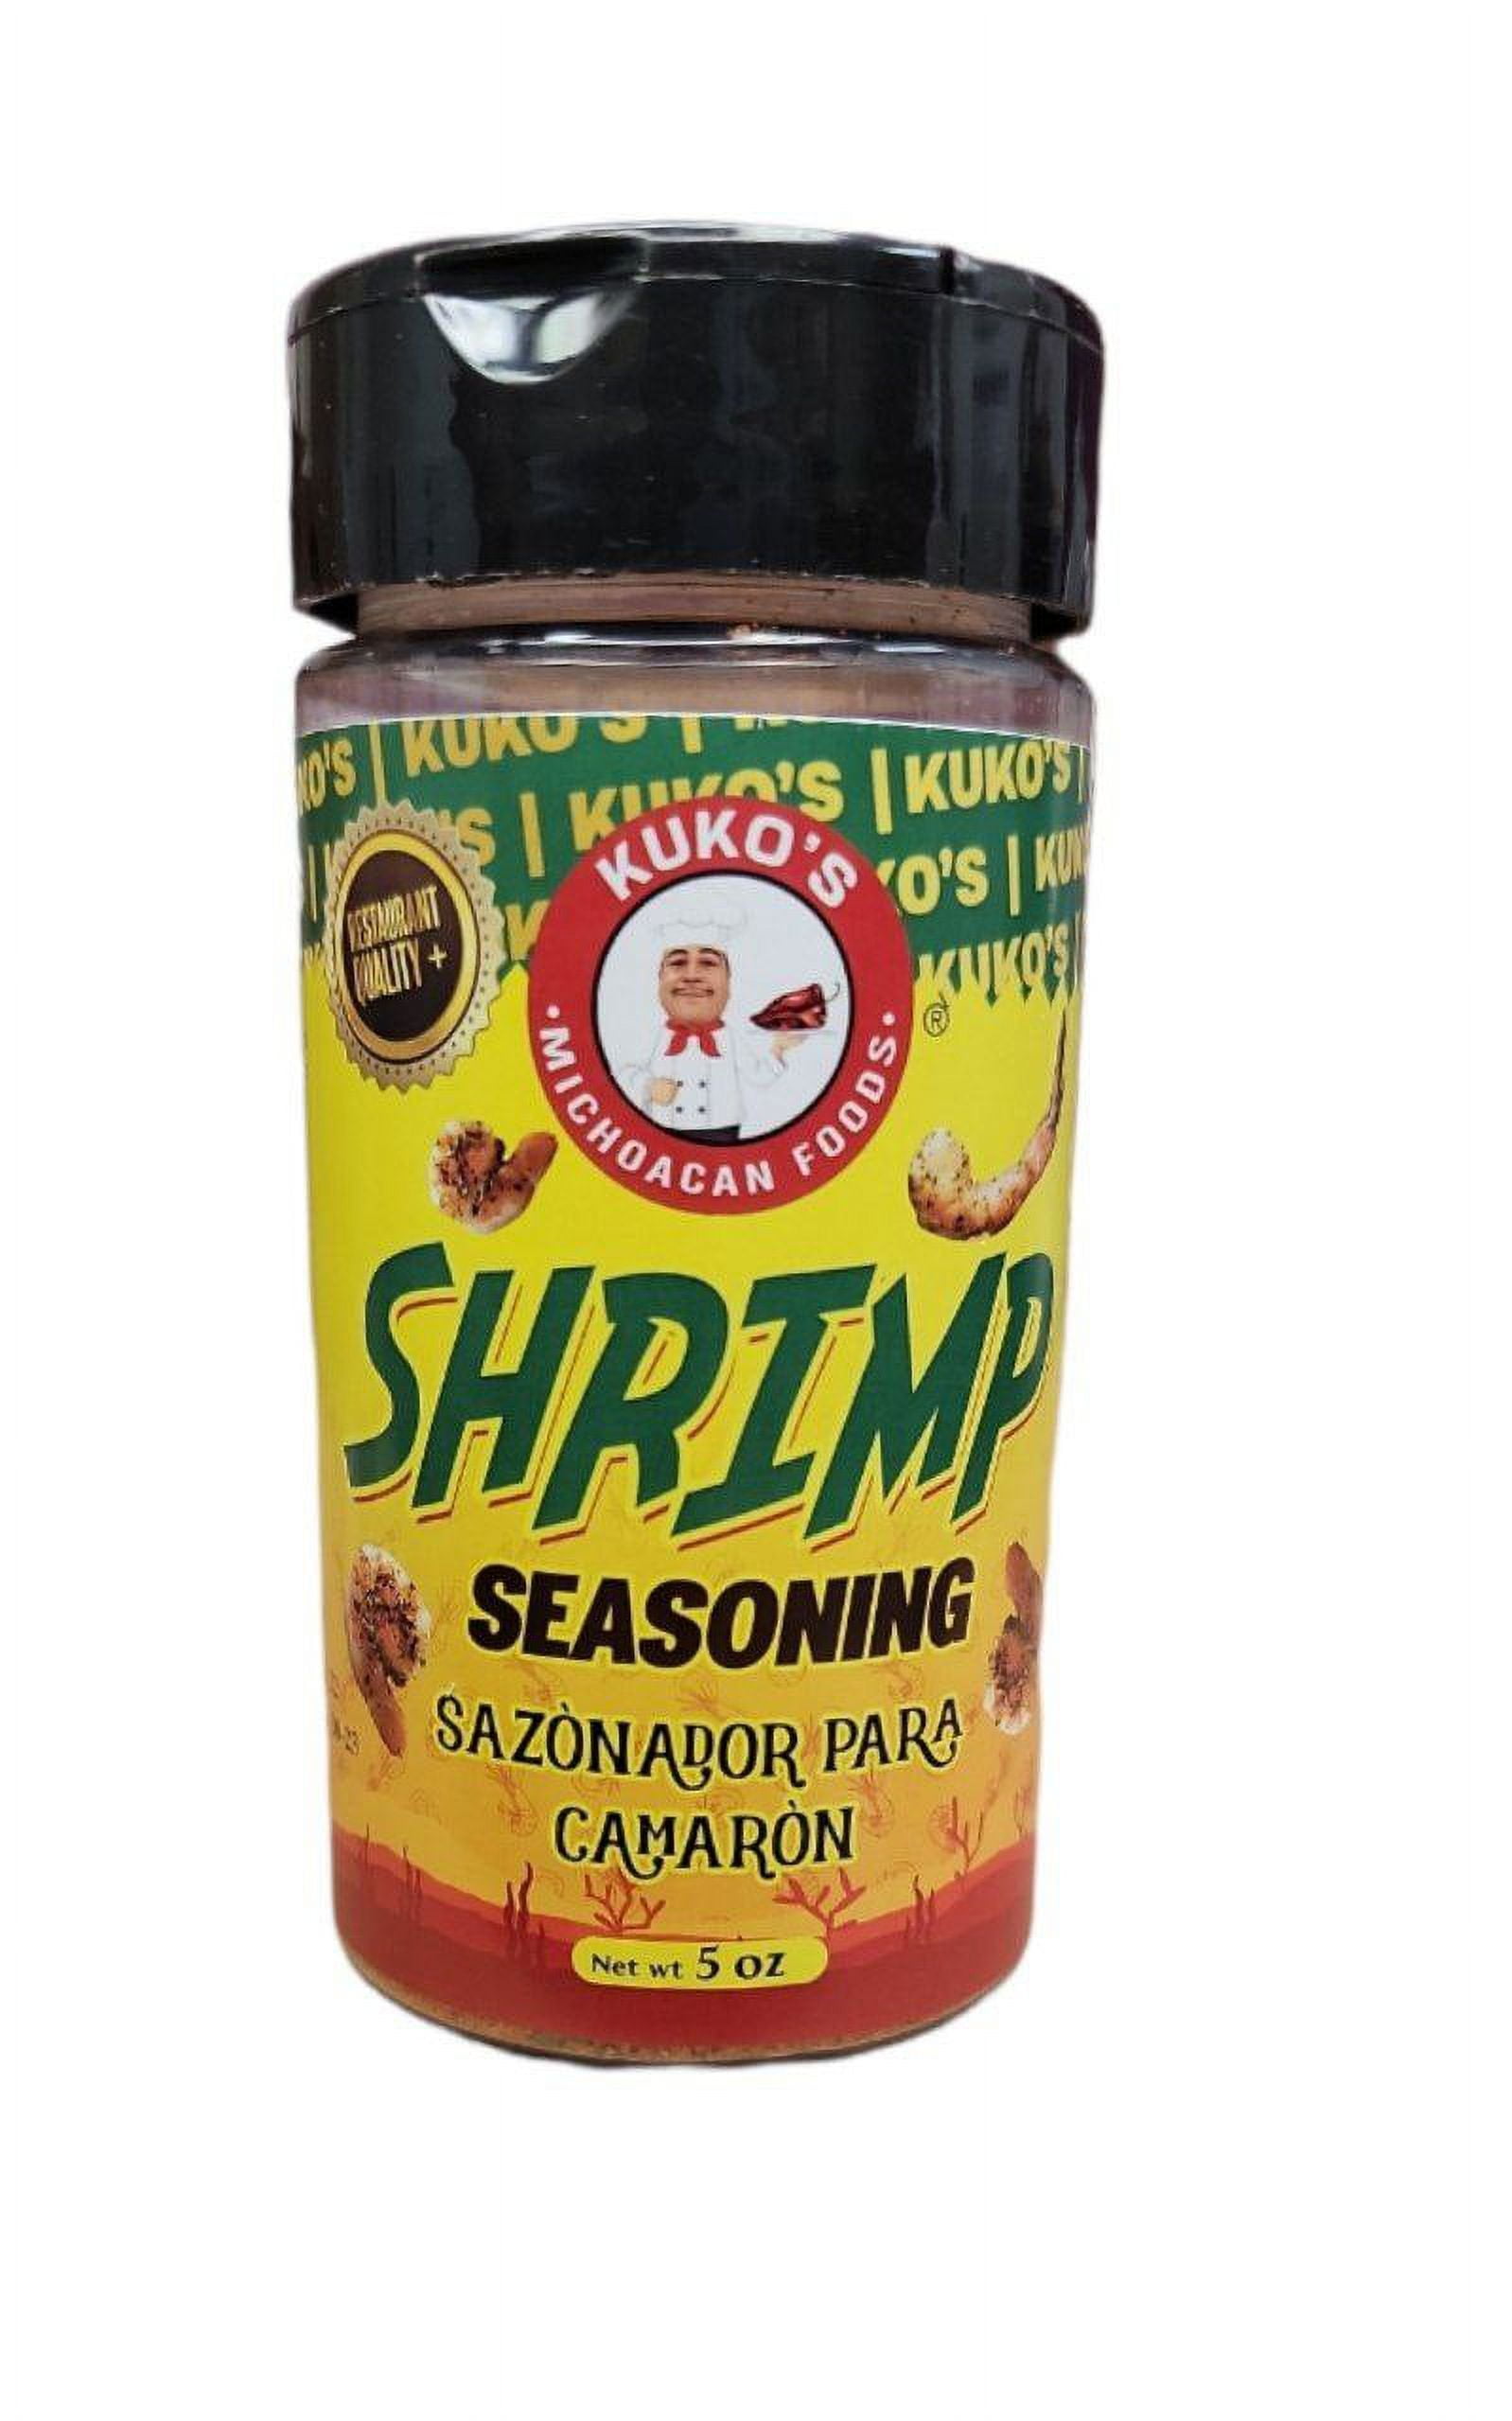 shrimp seasoning spice blend mix for all seafood delicious authentic  flavors used by hundreds of restaurants original latin Sazón